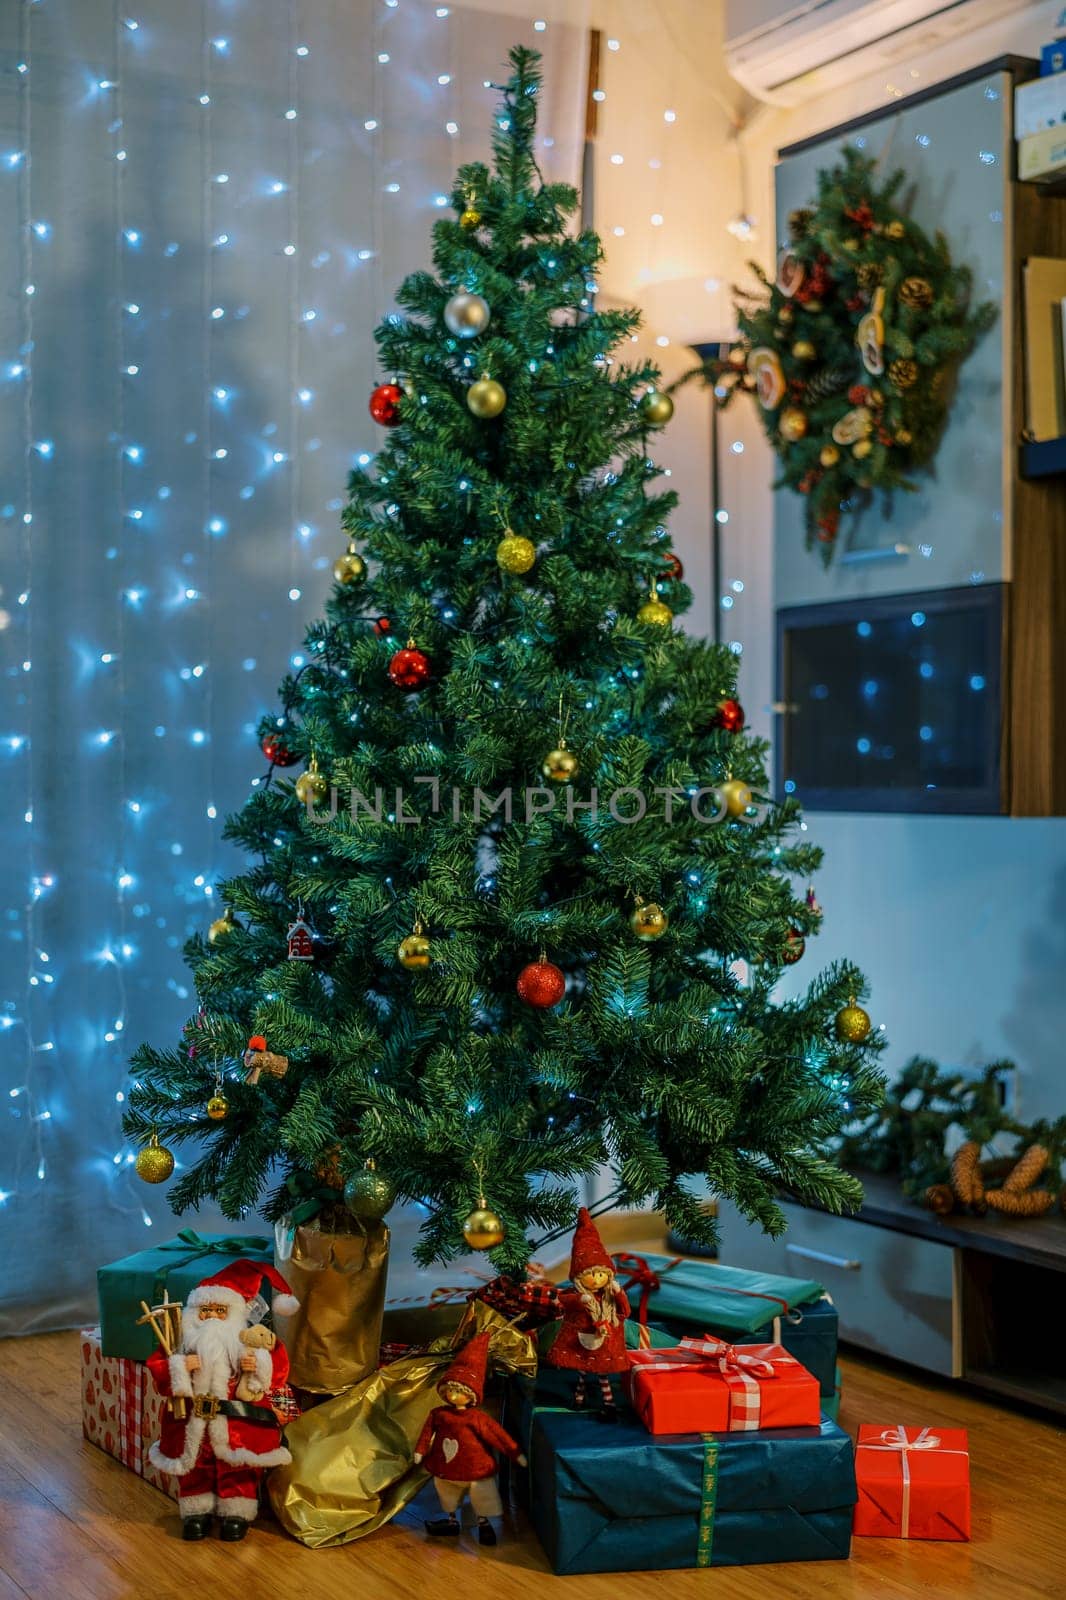 Figurines of Santa and gnomes stand on colorful gifts lying under the Christmas tree in the room. High quality photo